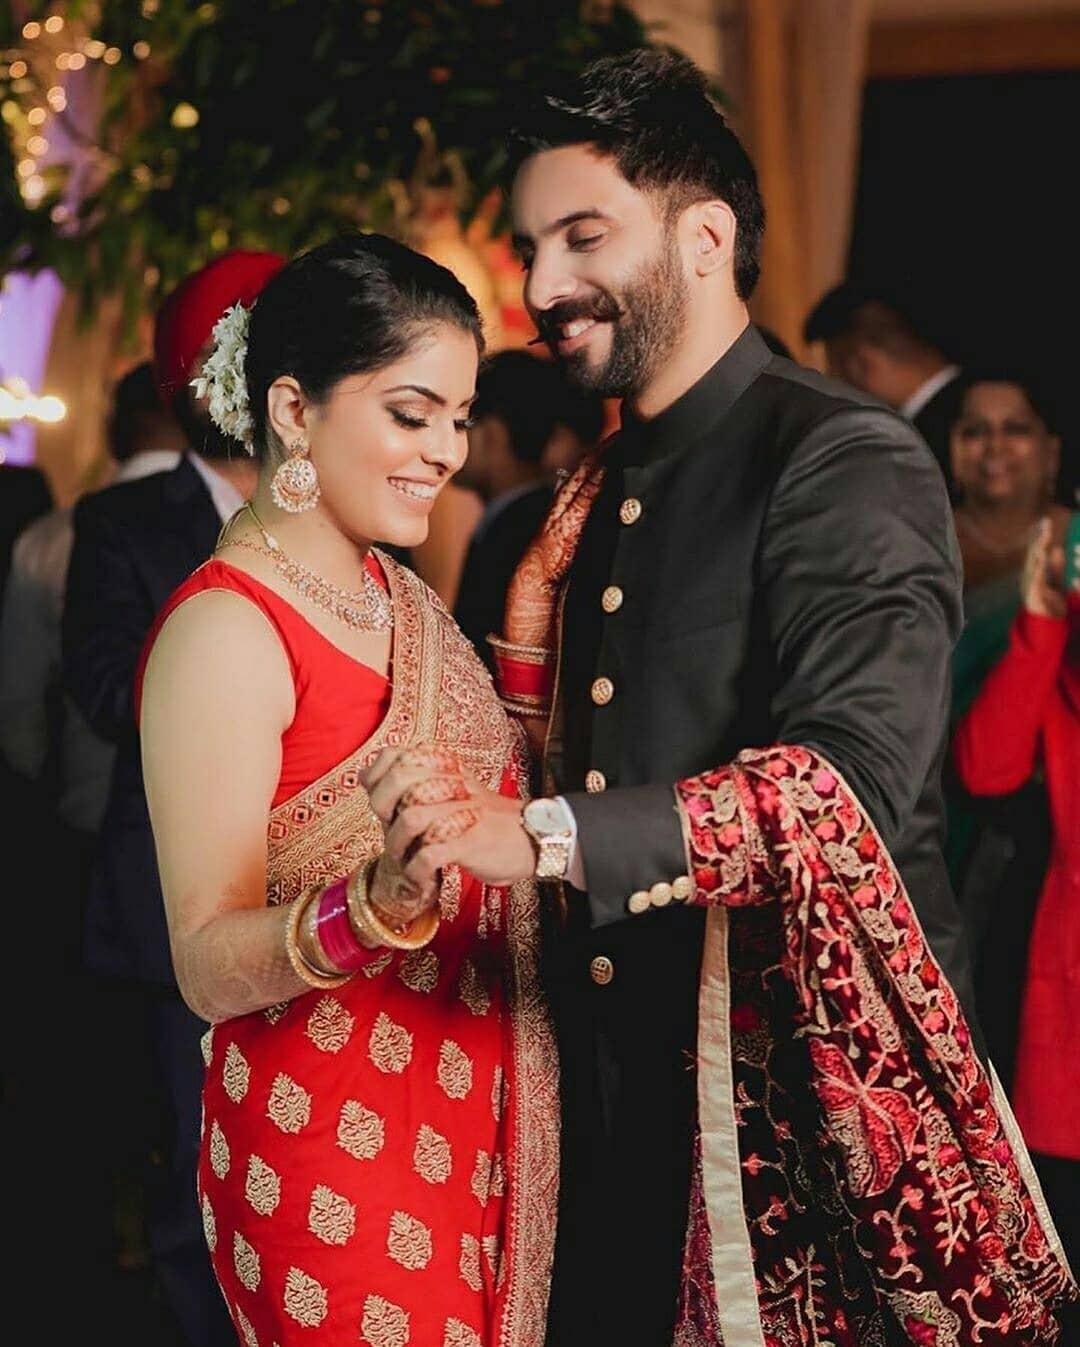 More pictures from Masaba Gupta's court marriage : r/BollywoodFashion